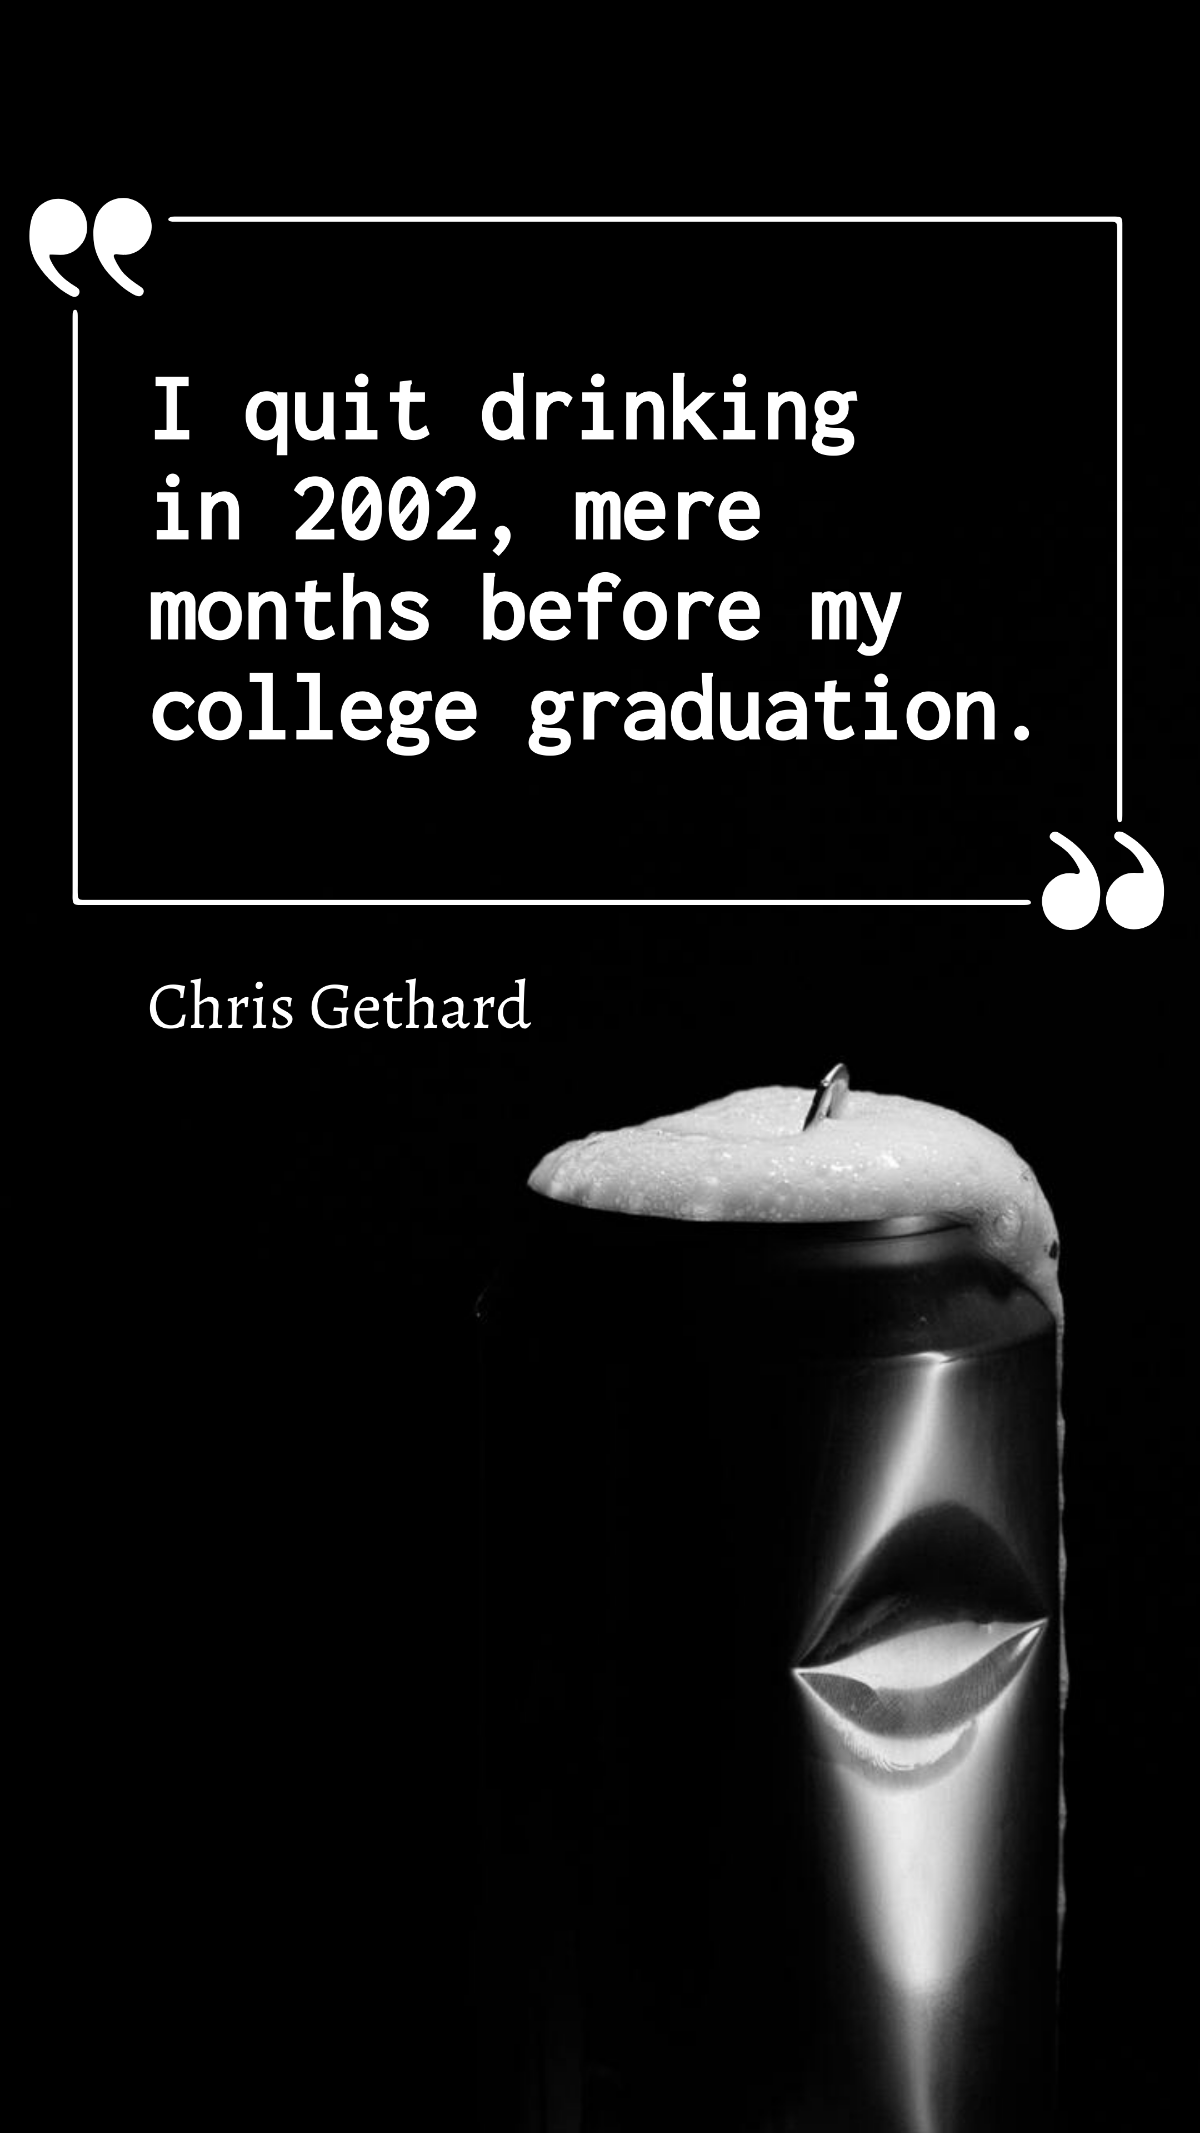 Free Chris Gethard - I quit drinking in 2002, mere months before my college graduation. Template